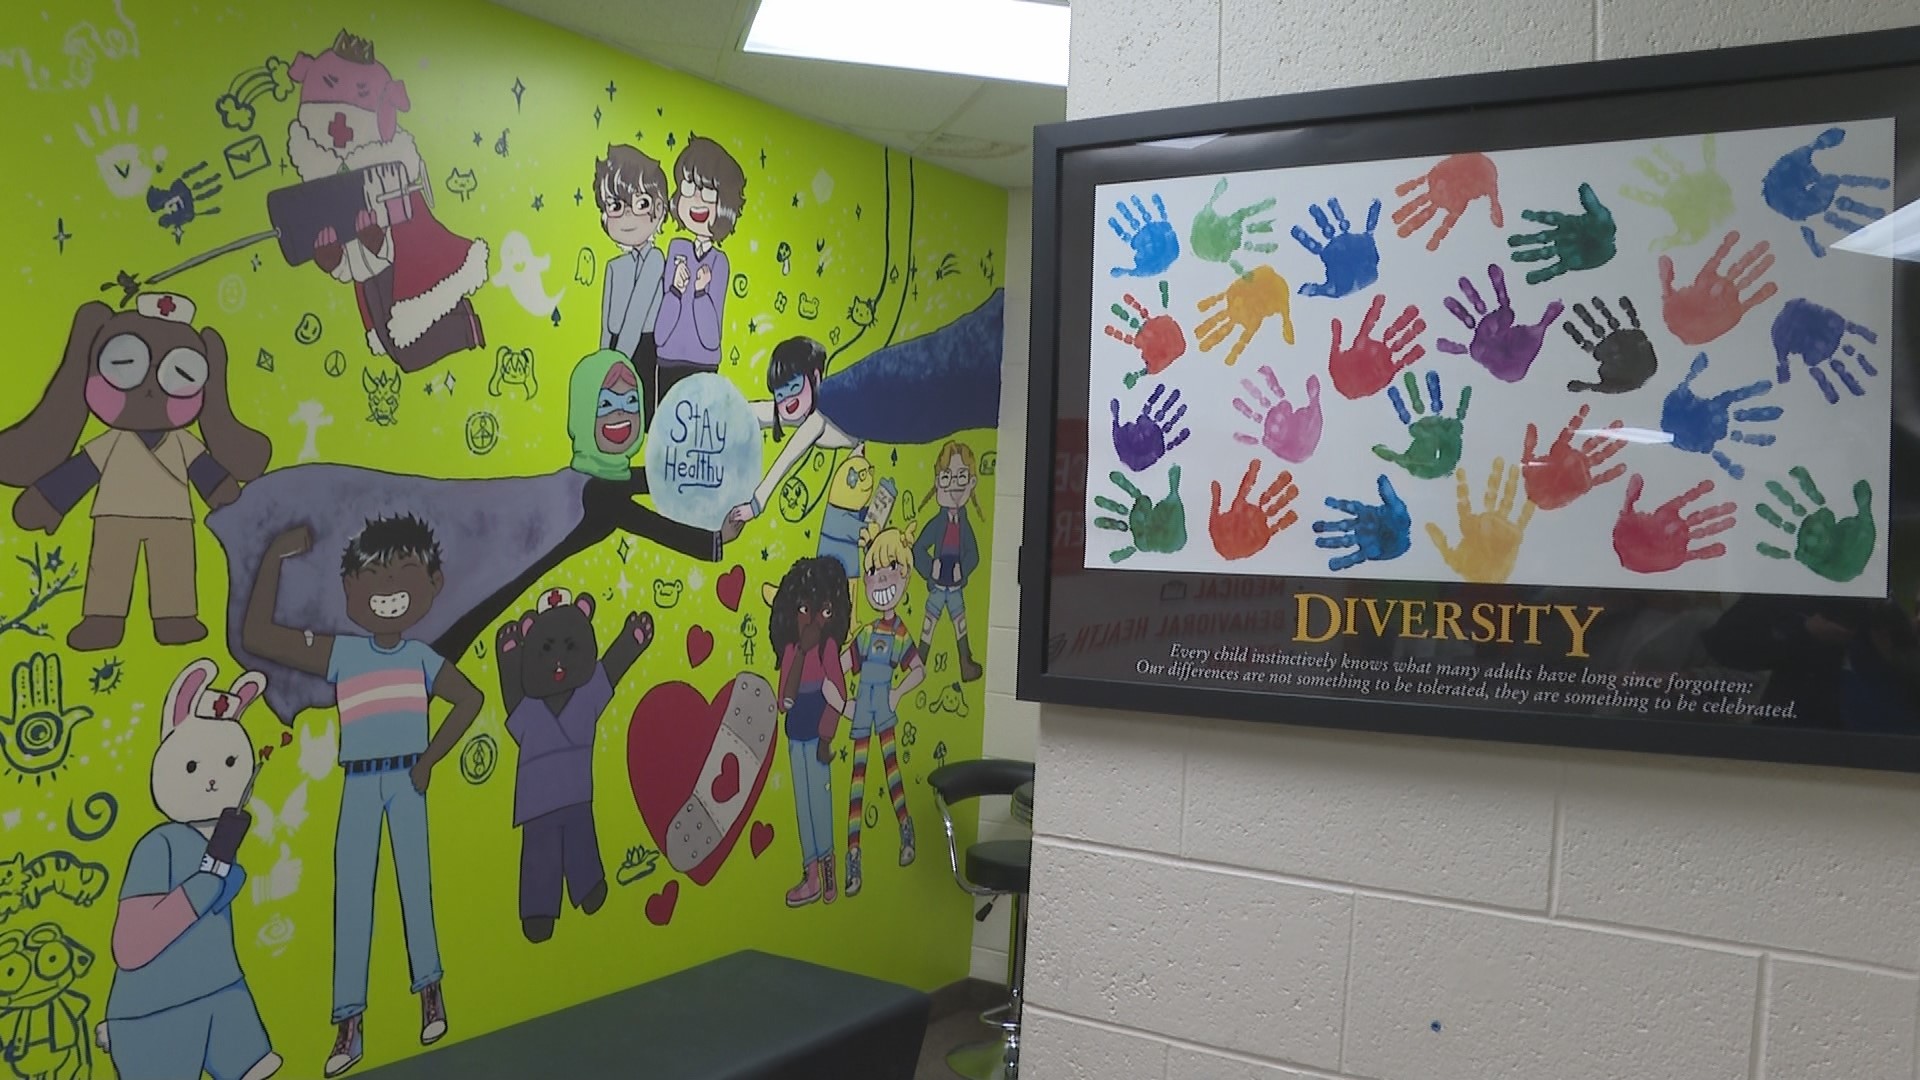 Rumors spread that the school board decided in a closed session to paint over the mural by the end of the week.